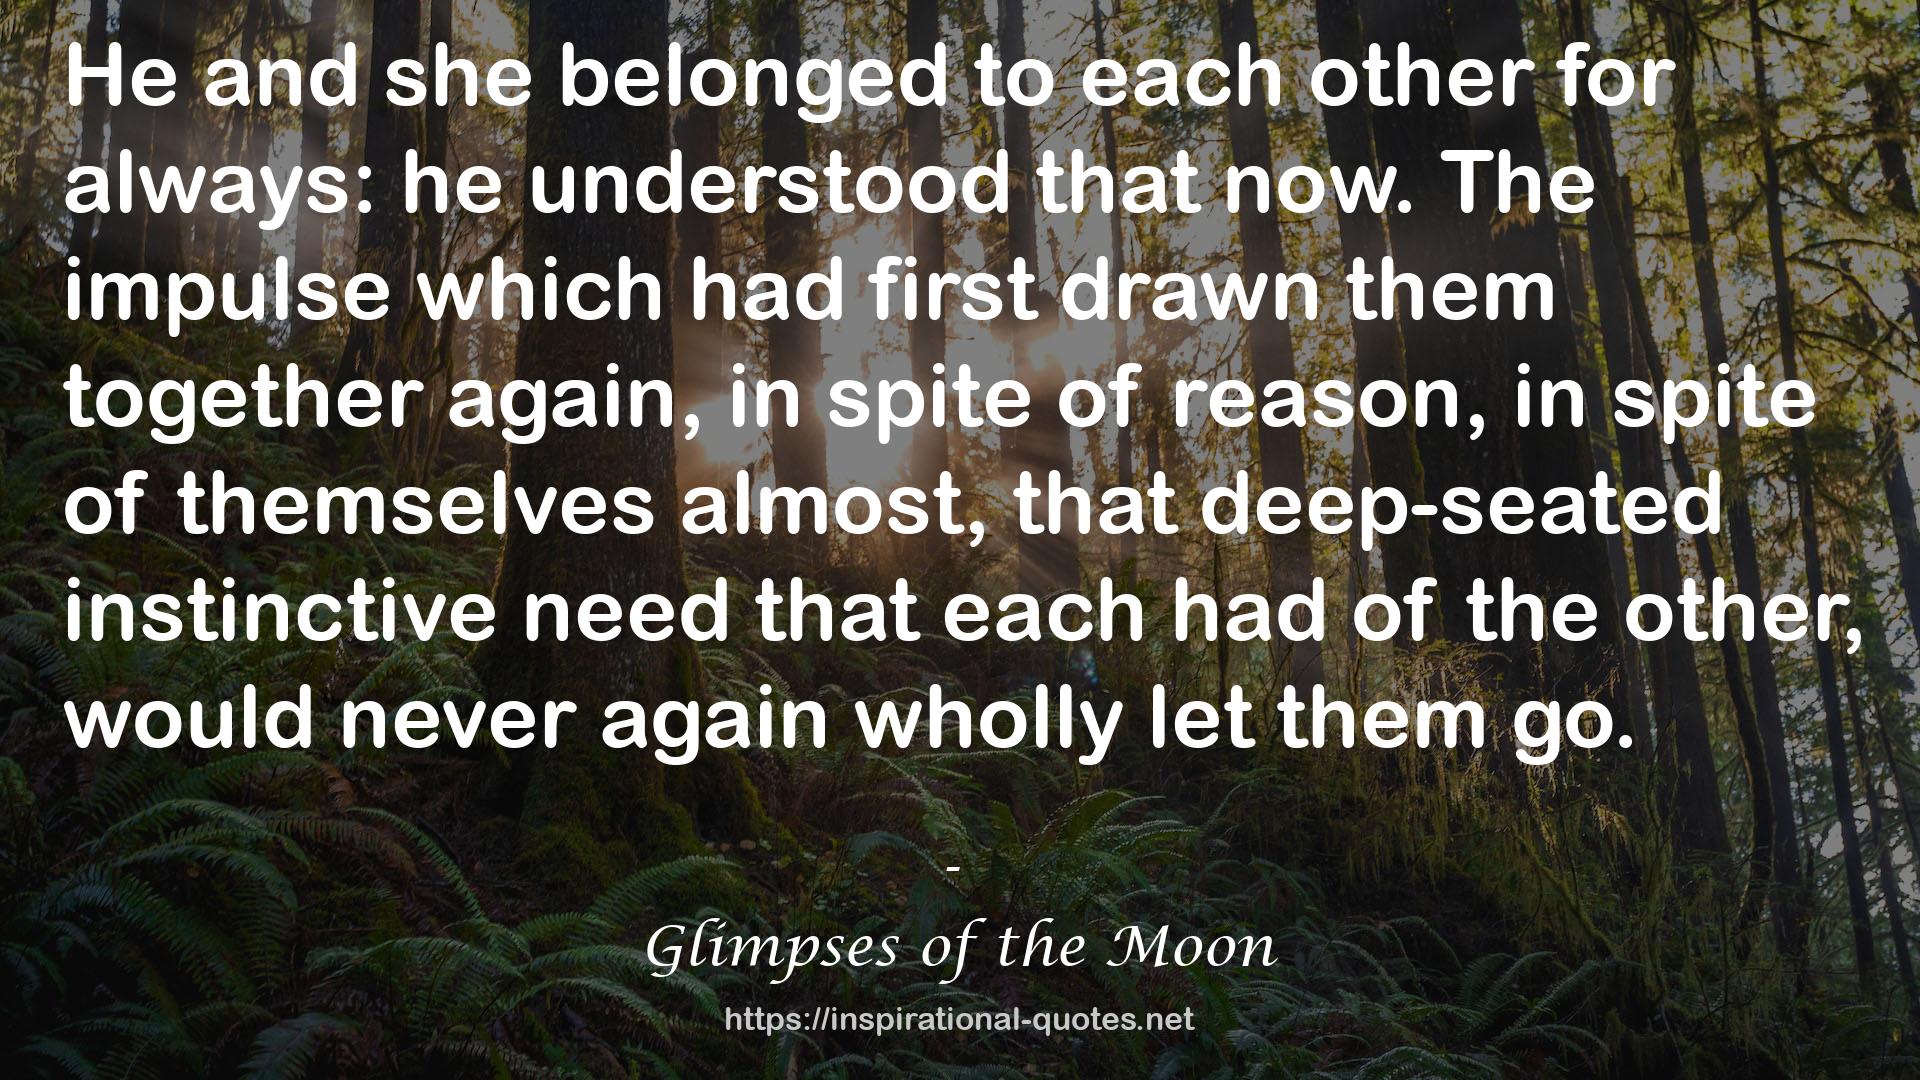 Glimpses of the Moon QUOTES